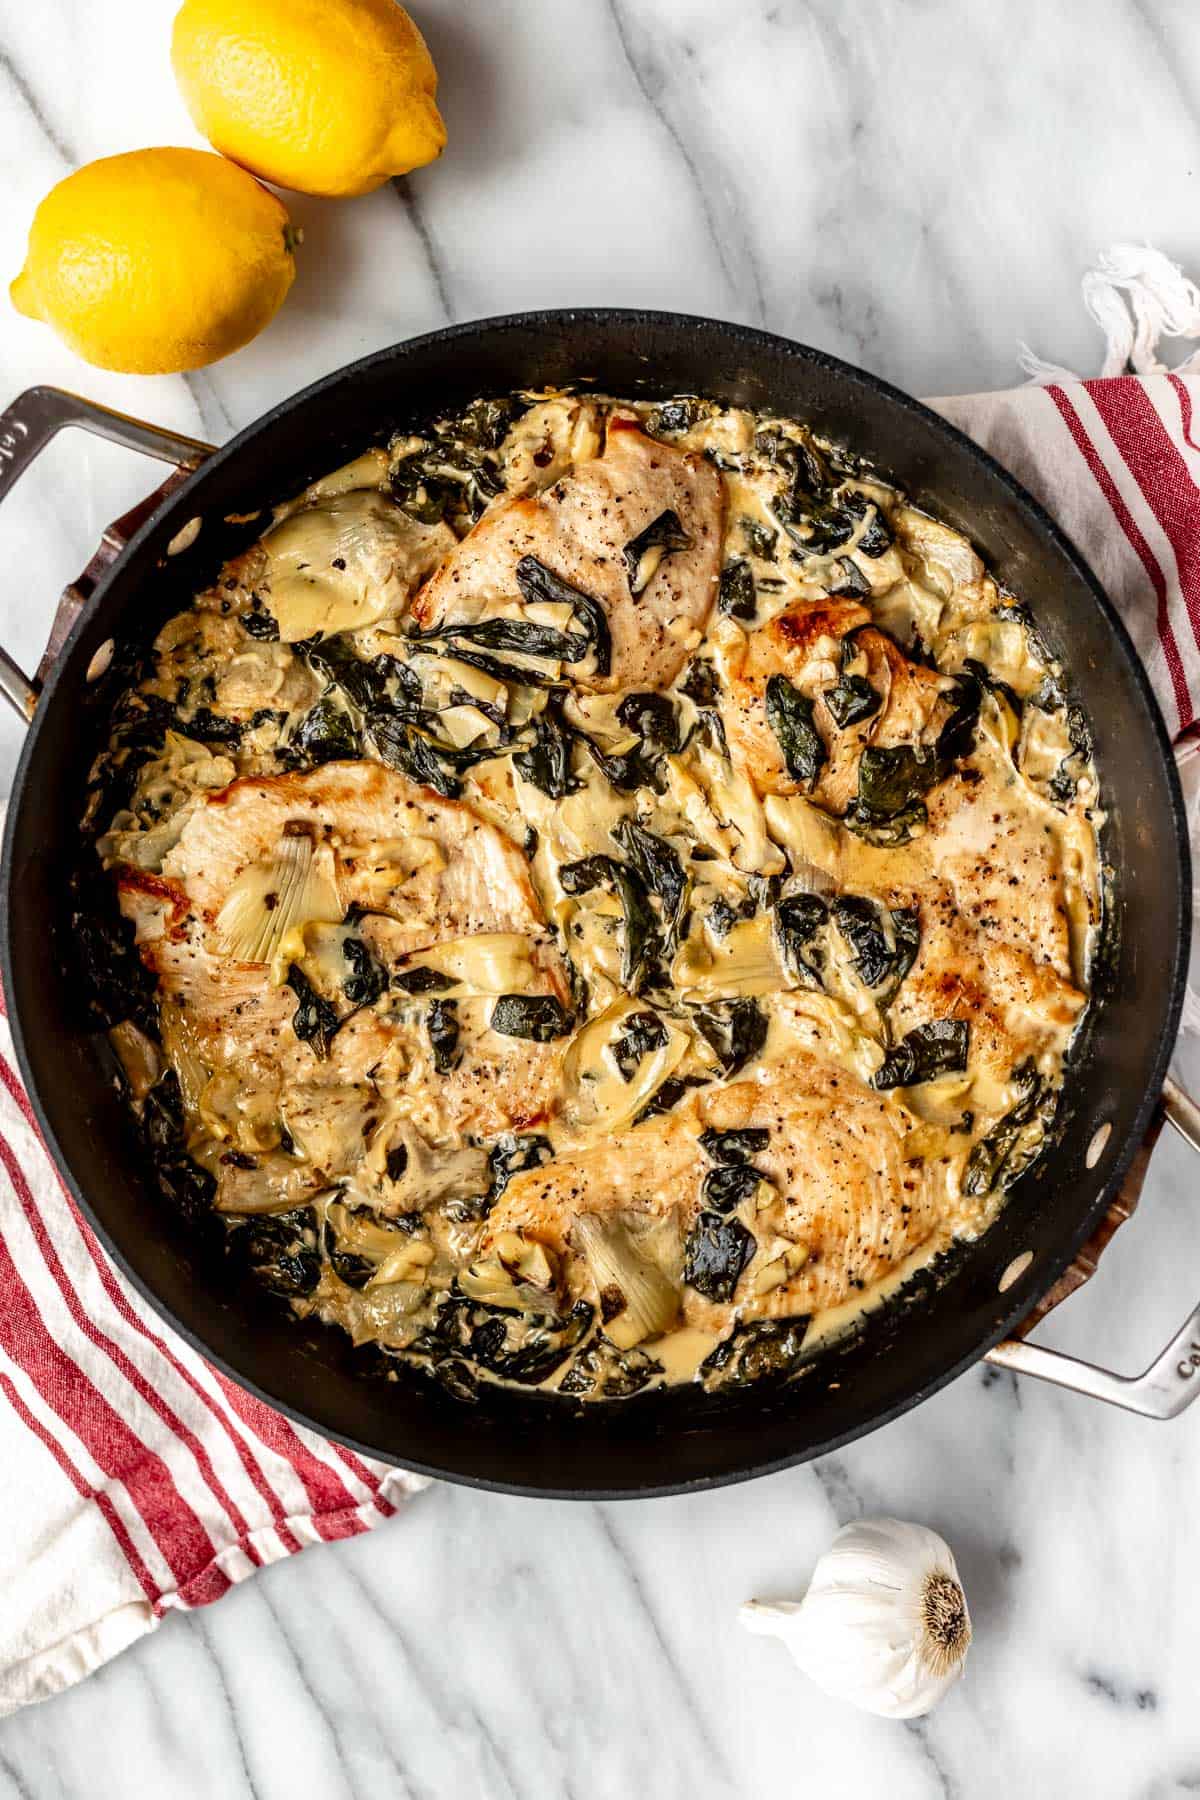 Overhead view of a skillet of spinach artichoke chicken in a skillet on a red and white striped towel with lemons and garlic around it.